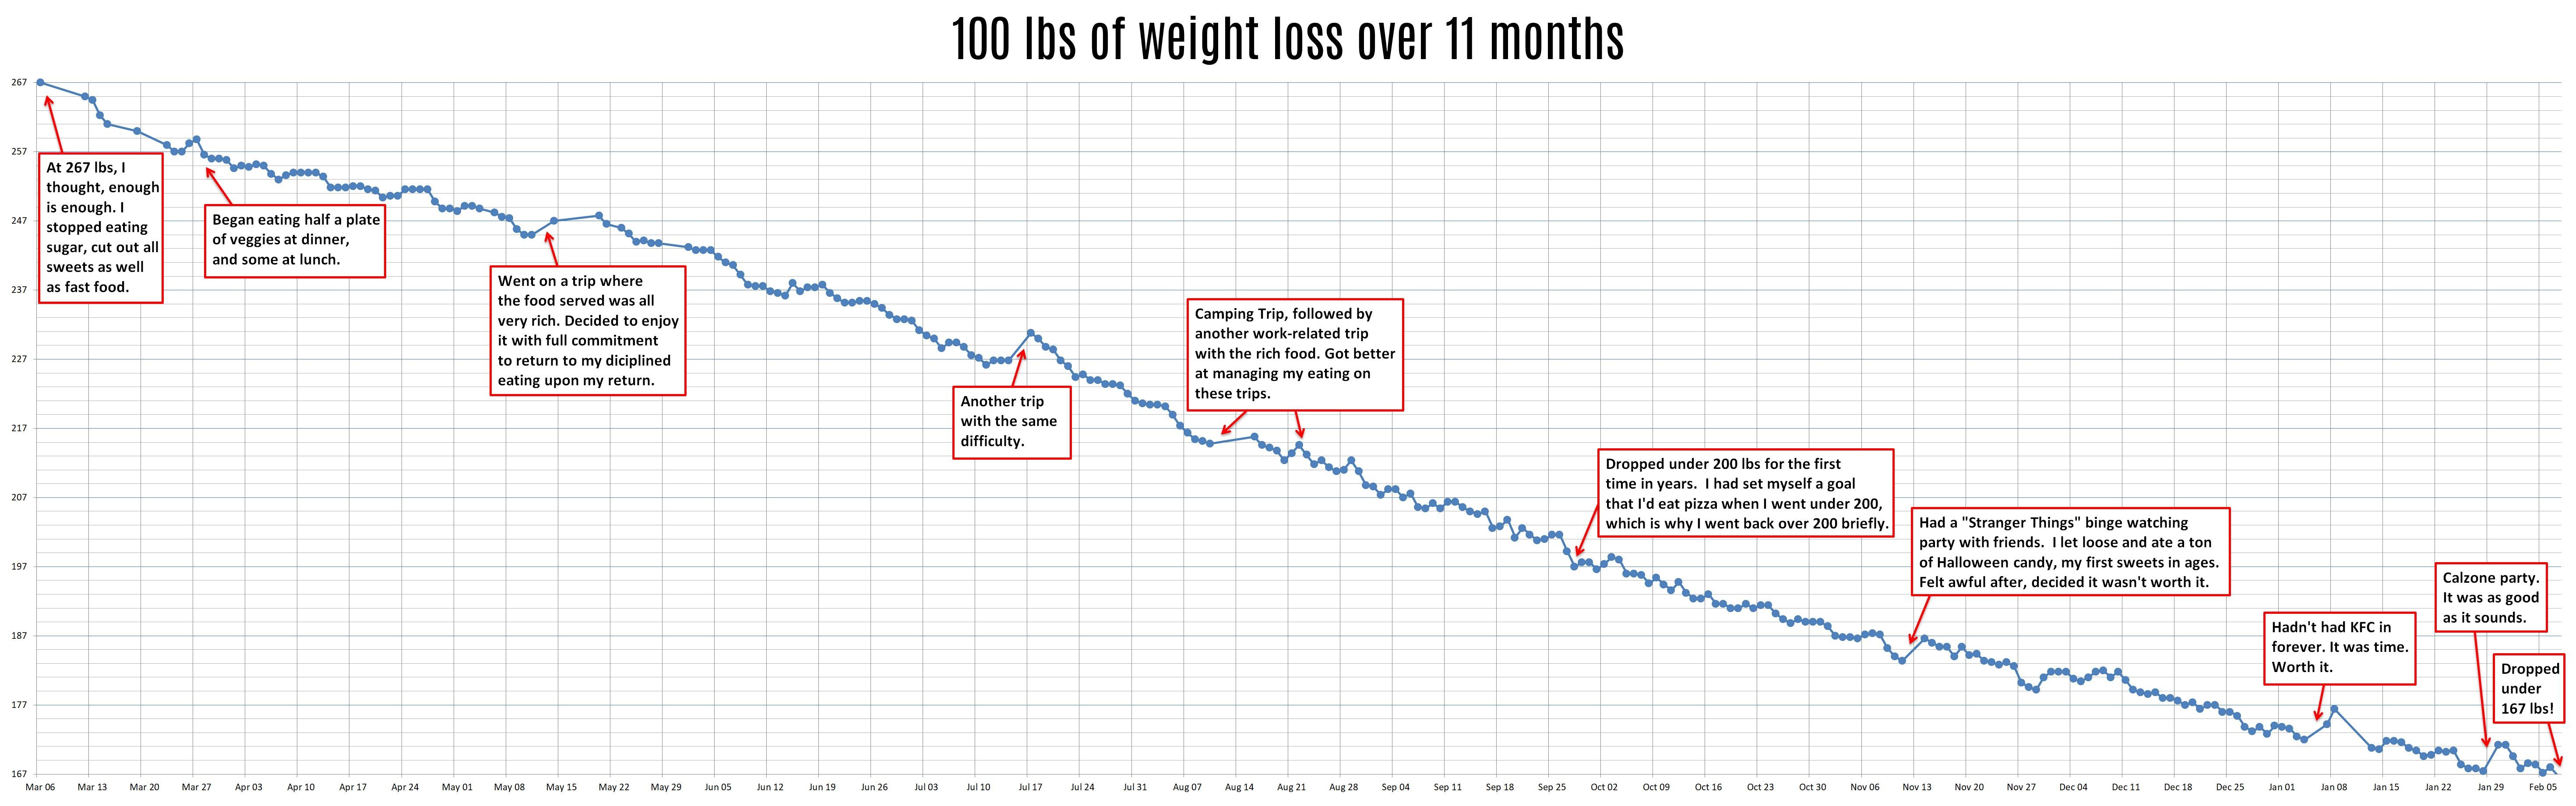 Daily Charted My Weight Loss Of 100 Lbs Over 11 Months OC Document Spreadsheet Reddit